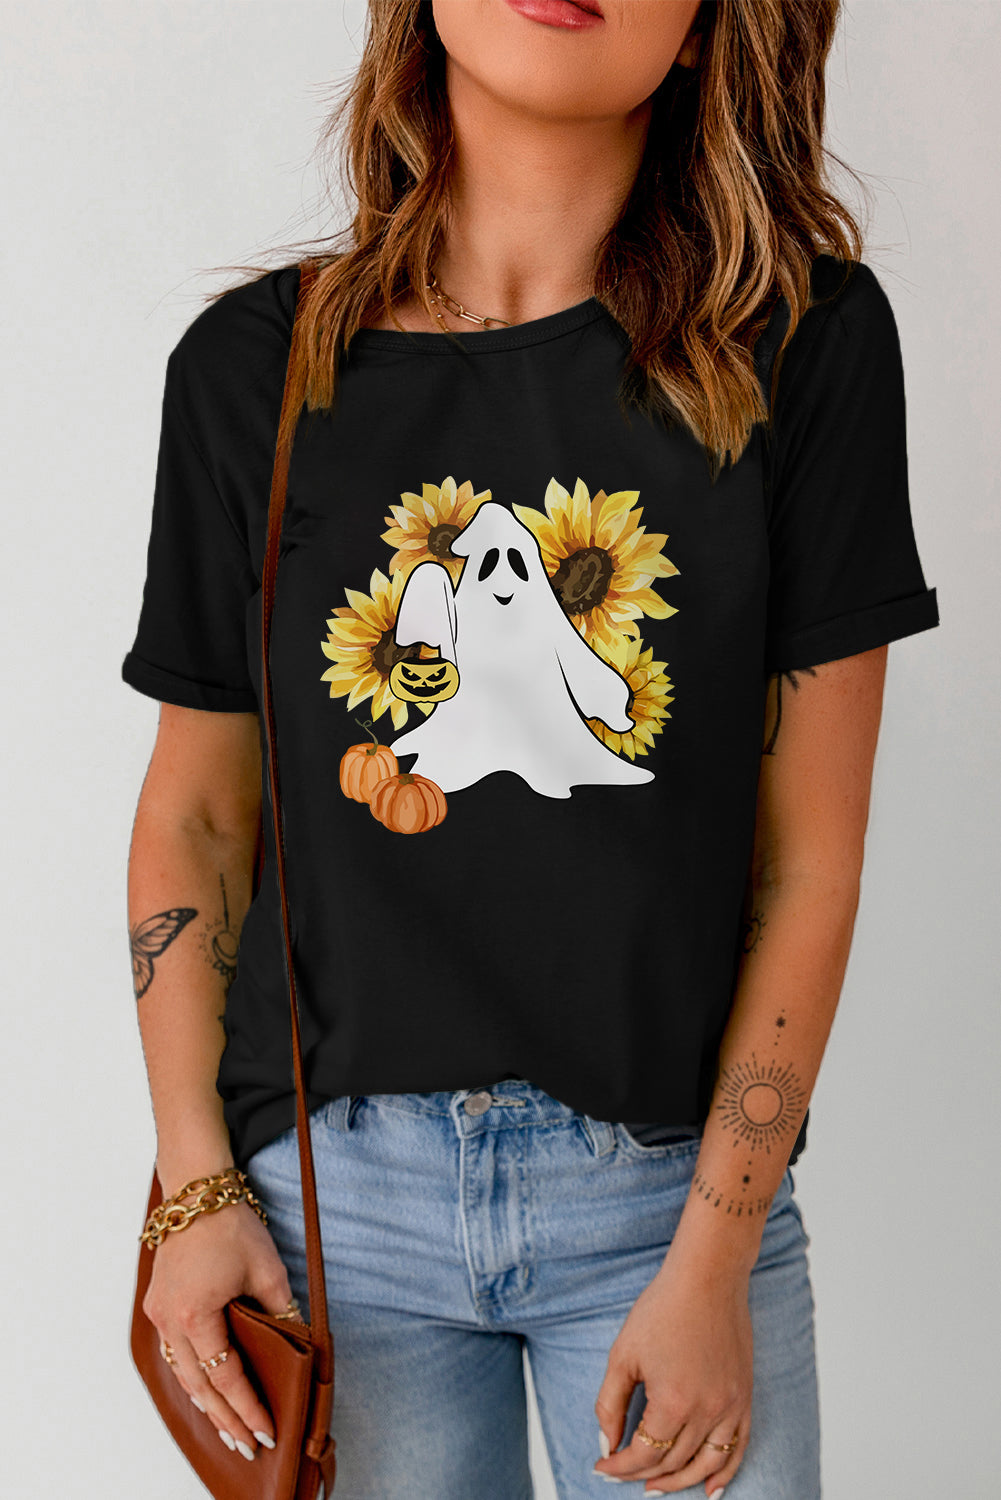 Floral Ghost Graphic Tee Shirt